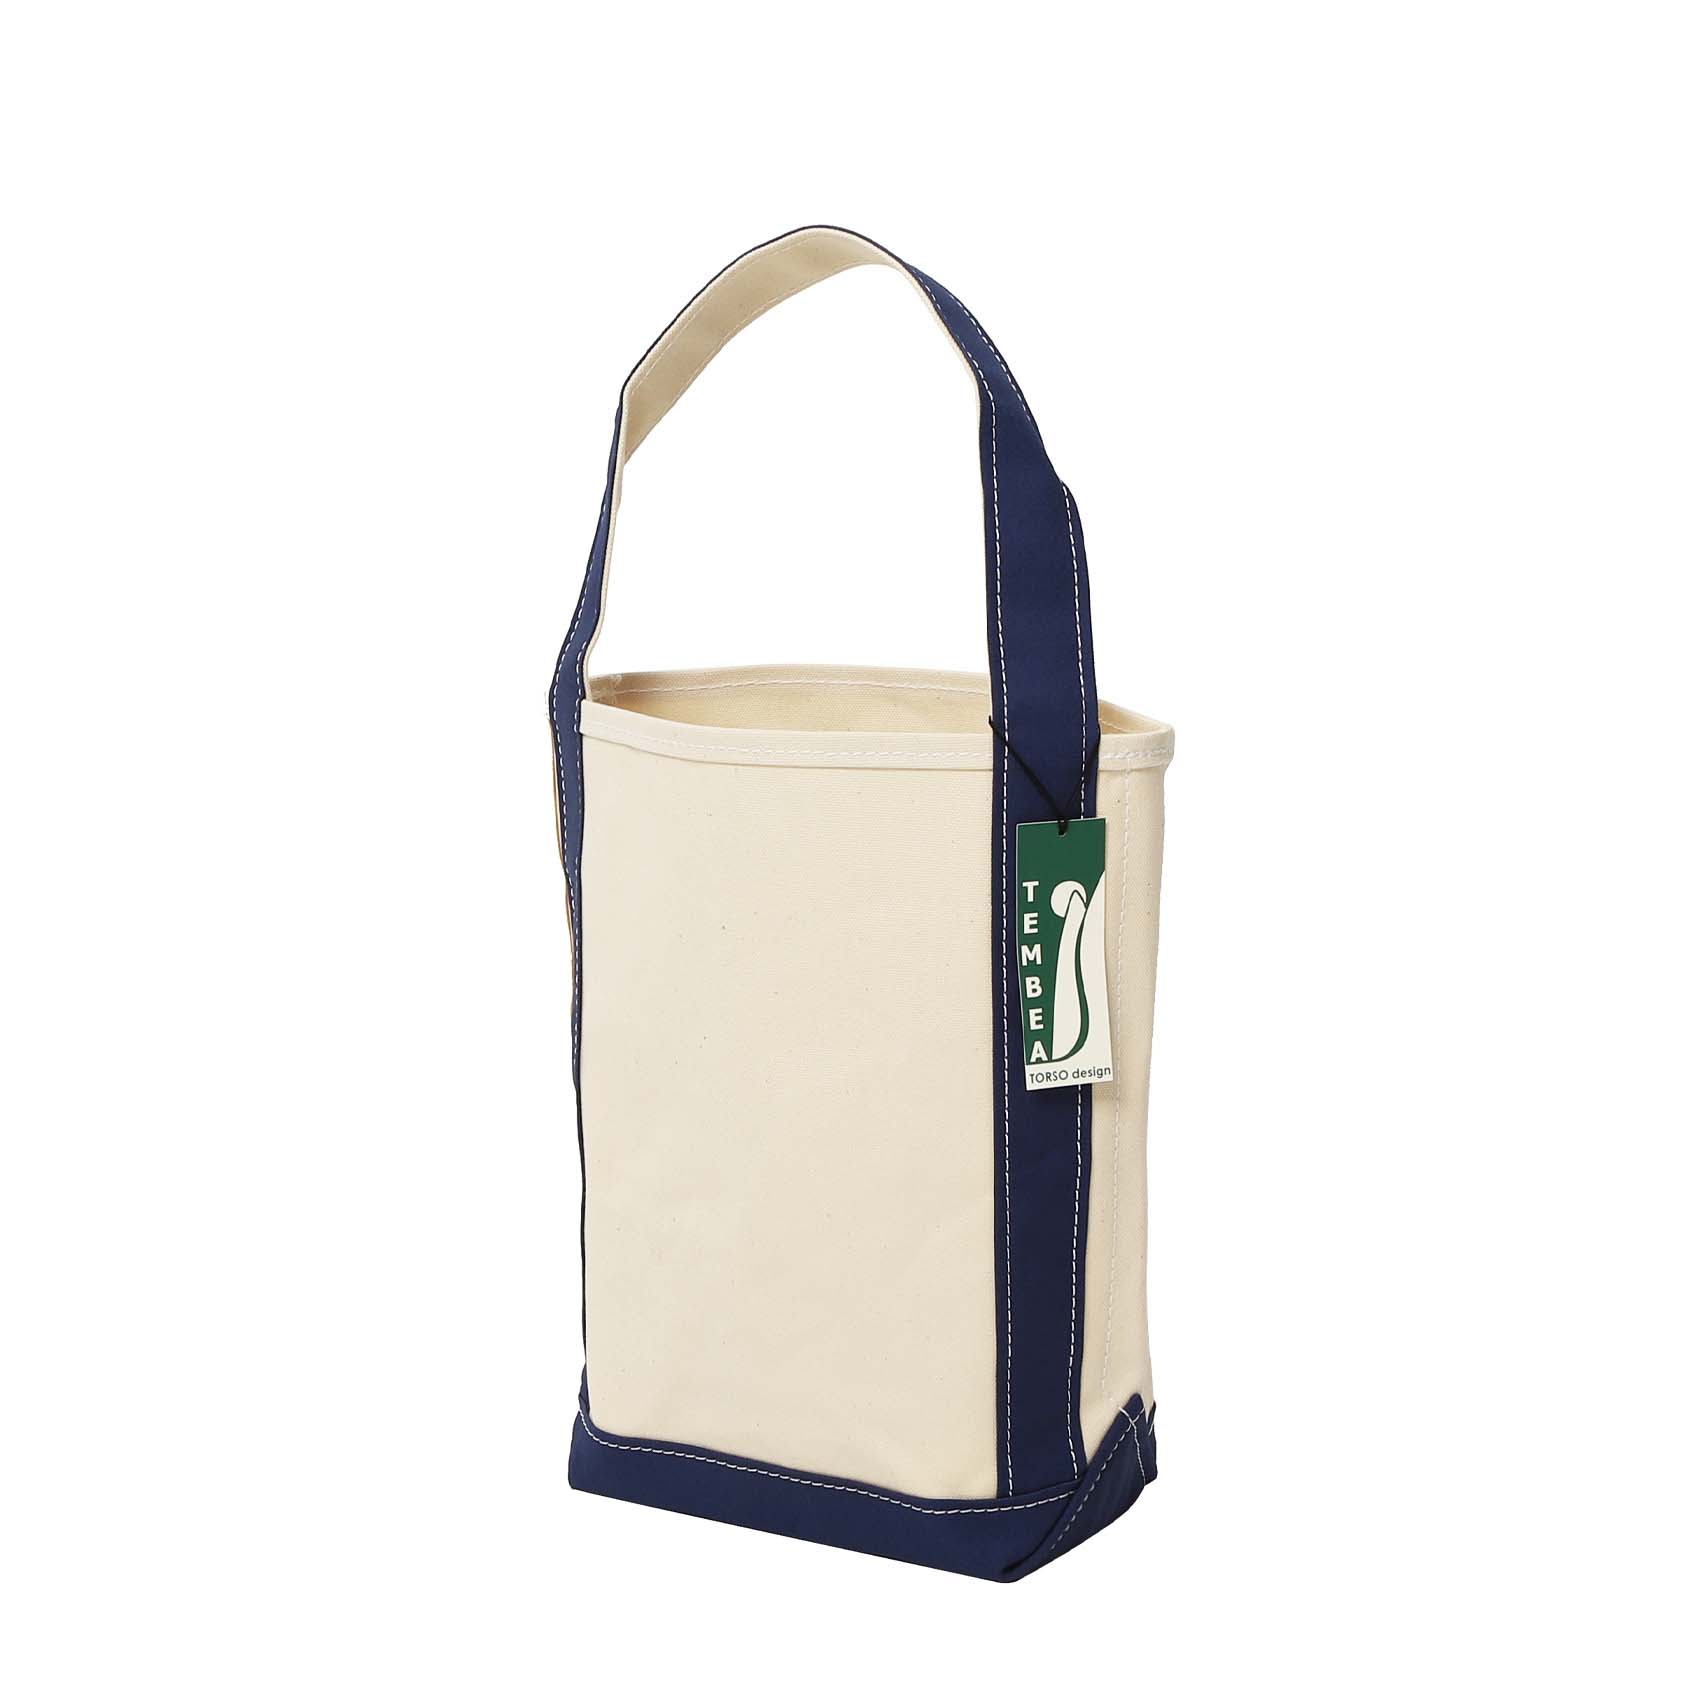 BAGUETTE TOTE SMALL - NATURAL/NAVY